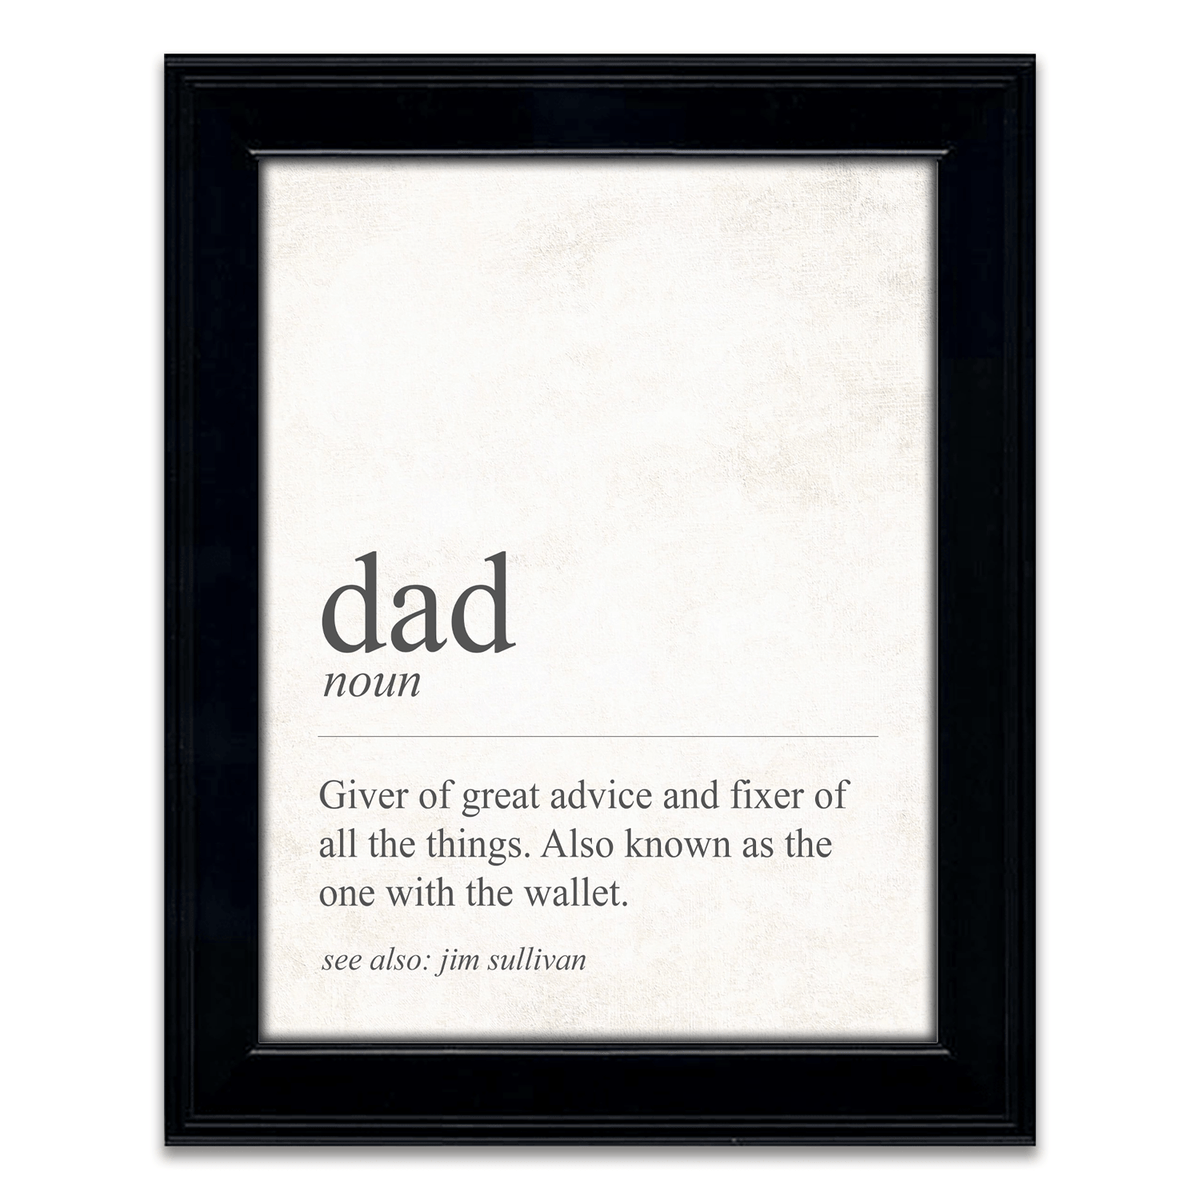 Definition of dad personalized with his name